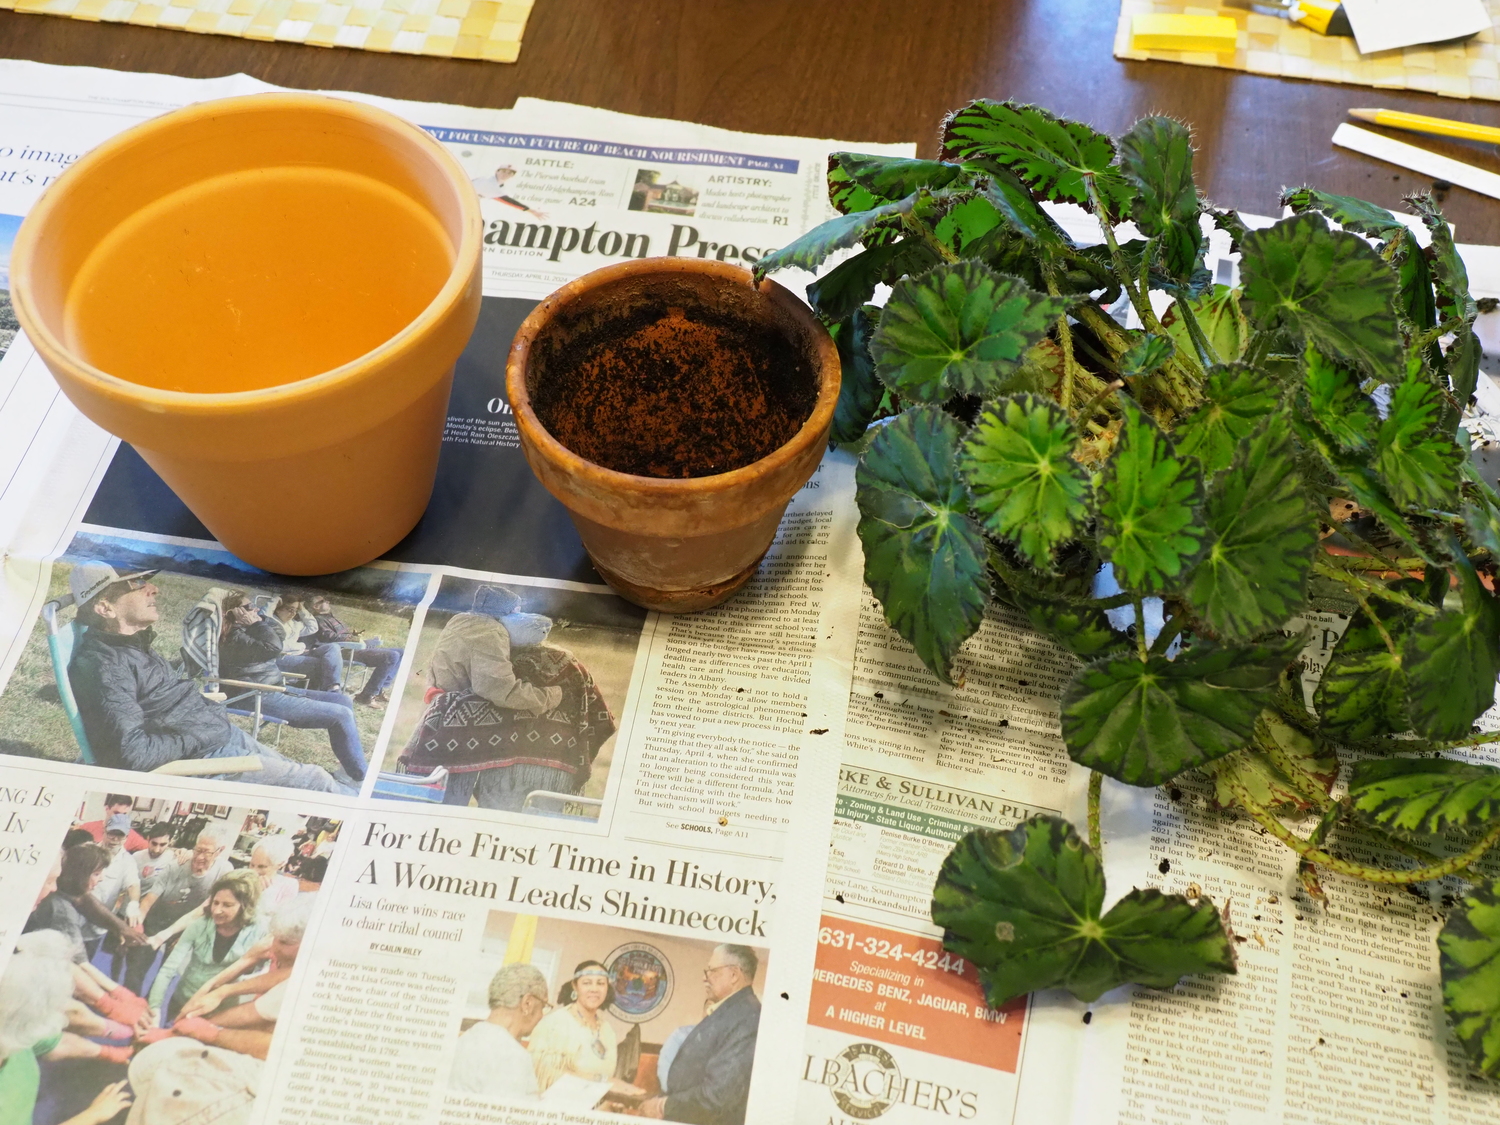 On the right is a 2-year-old Begonia grown from a leaf cutting. After being in the 4-inch clay pot (center) it needed a 